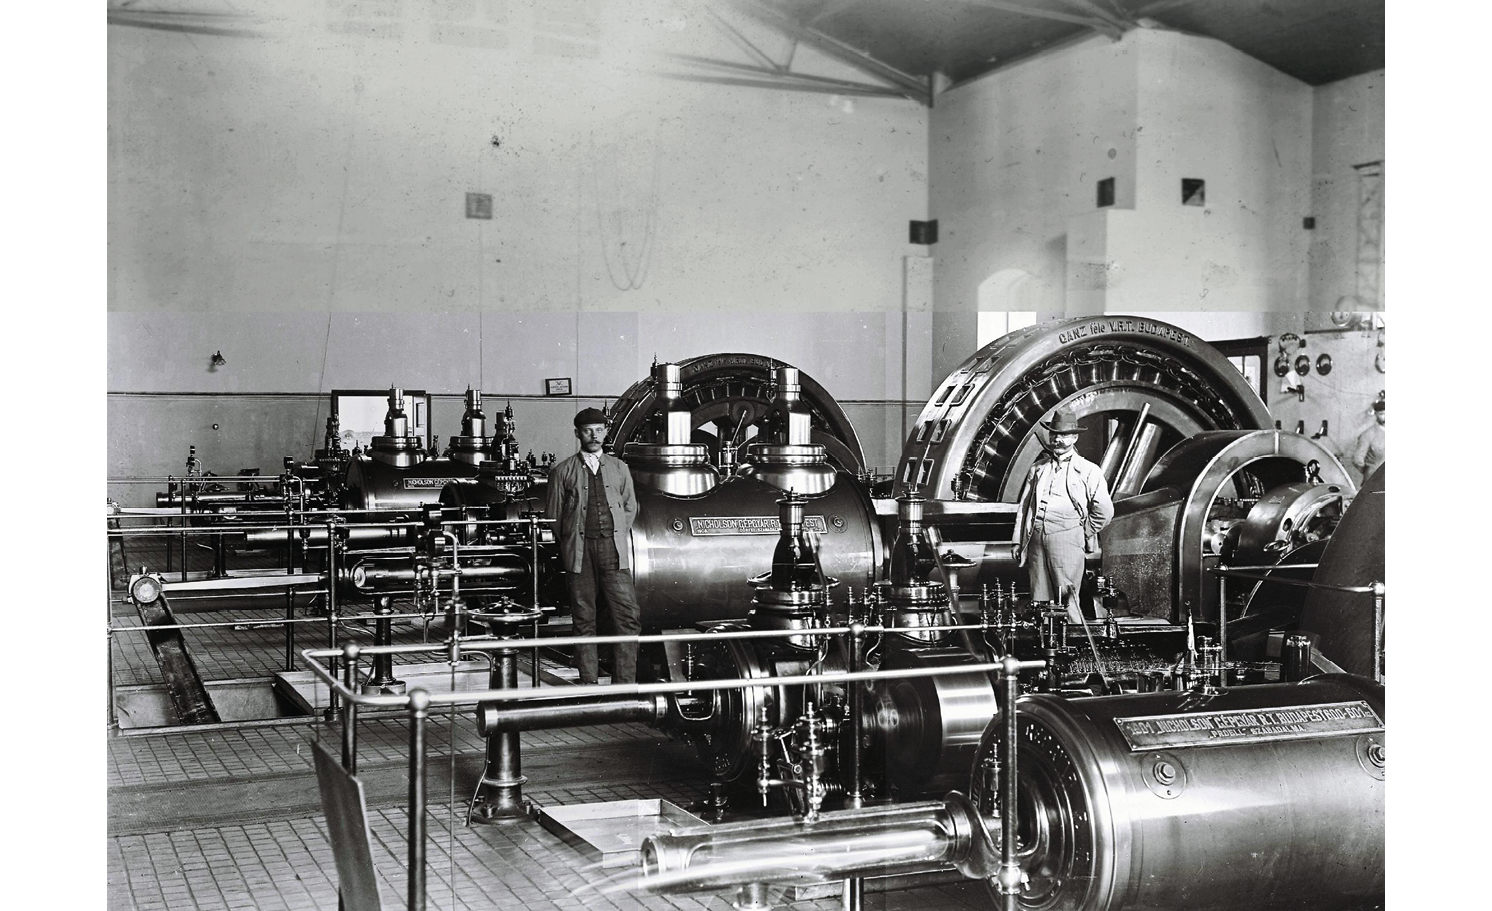 A black and white photograph from 1914 Hungary: shows a steam engine factory with two men posing for the photograph next to one of the machines.